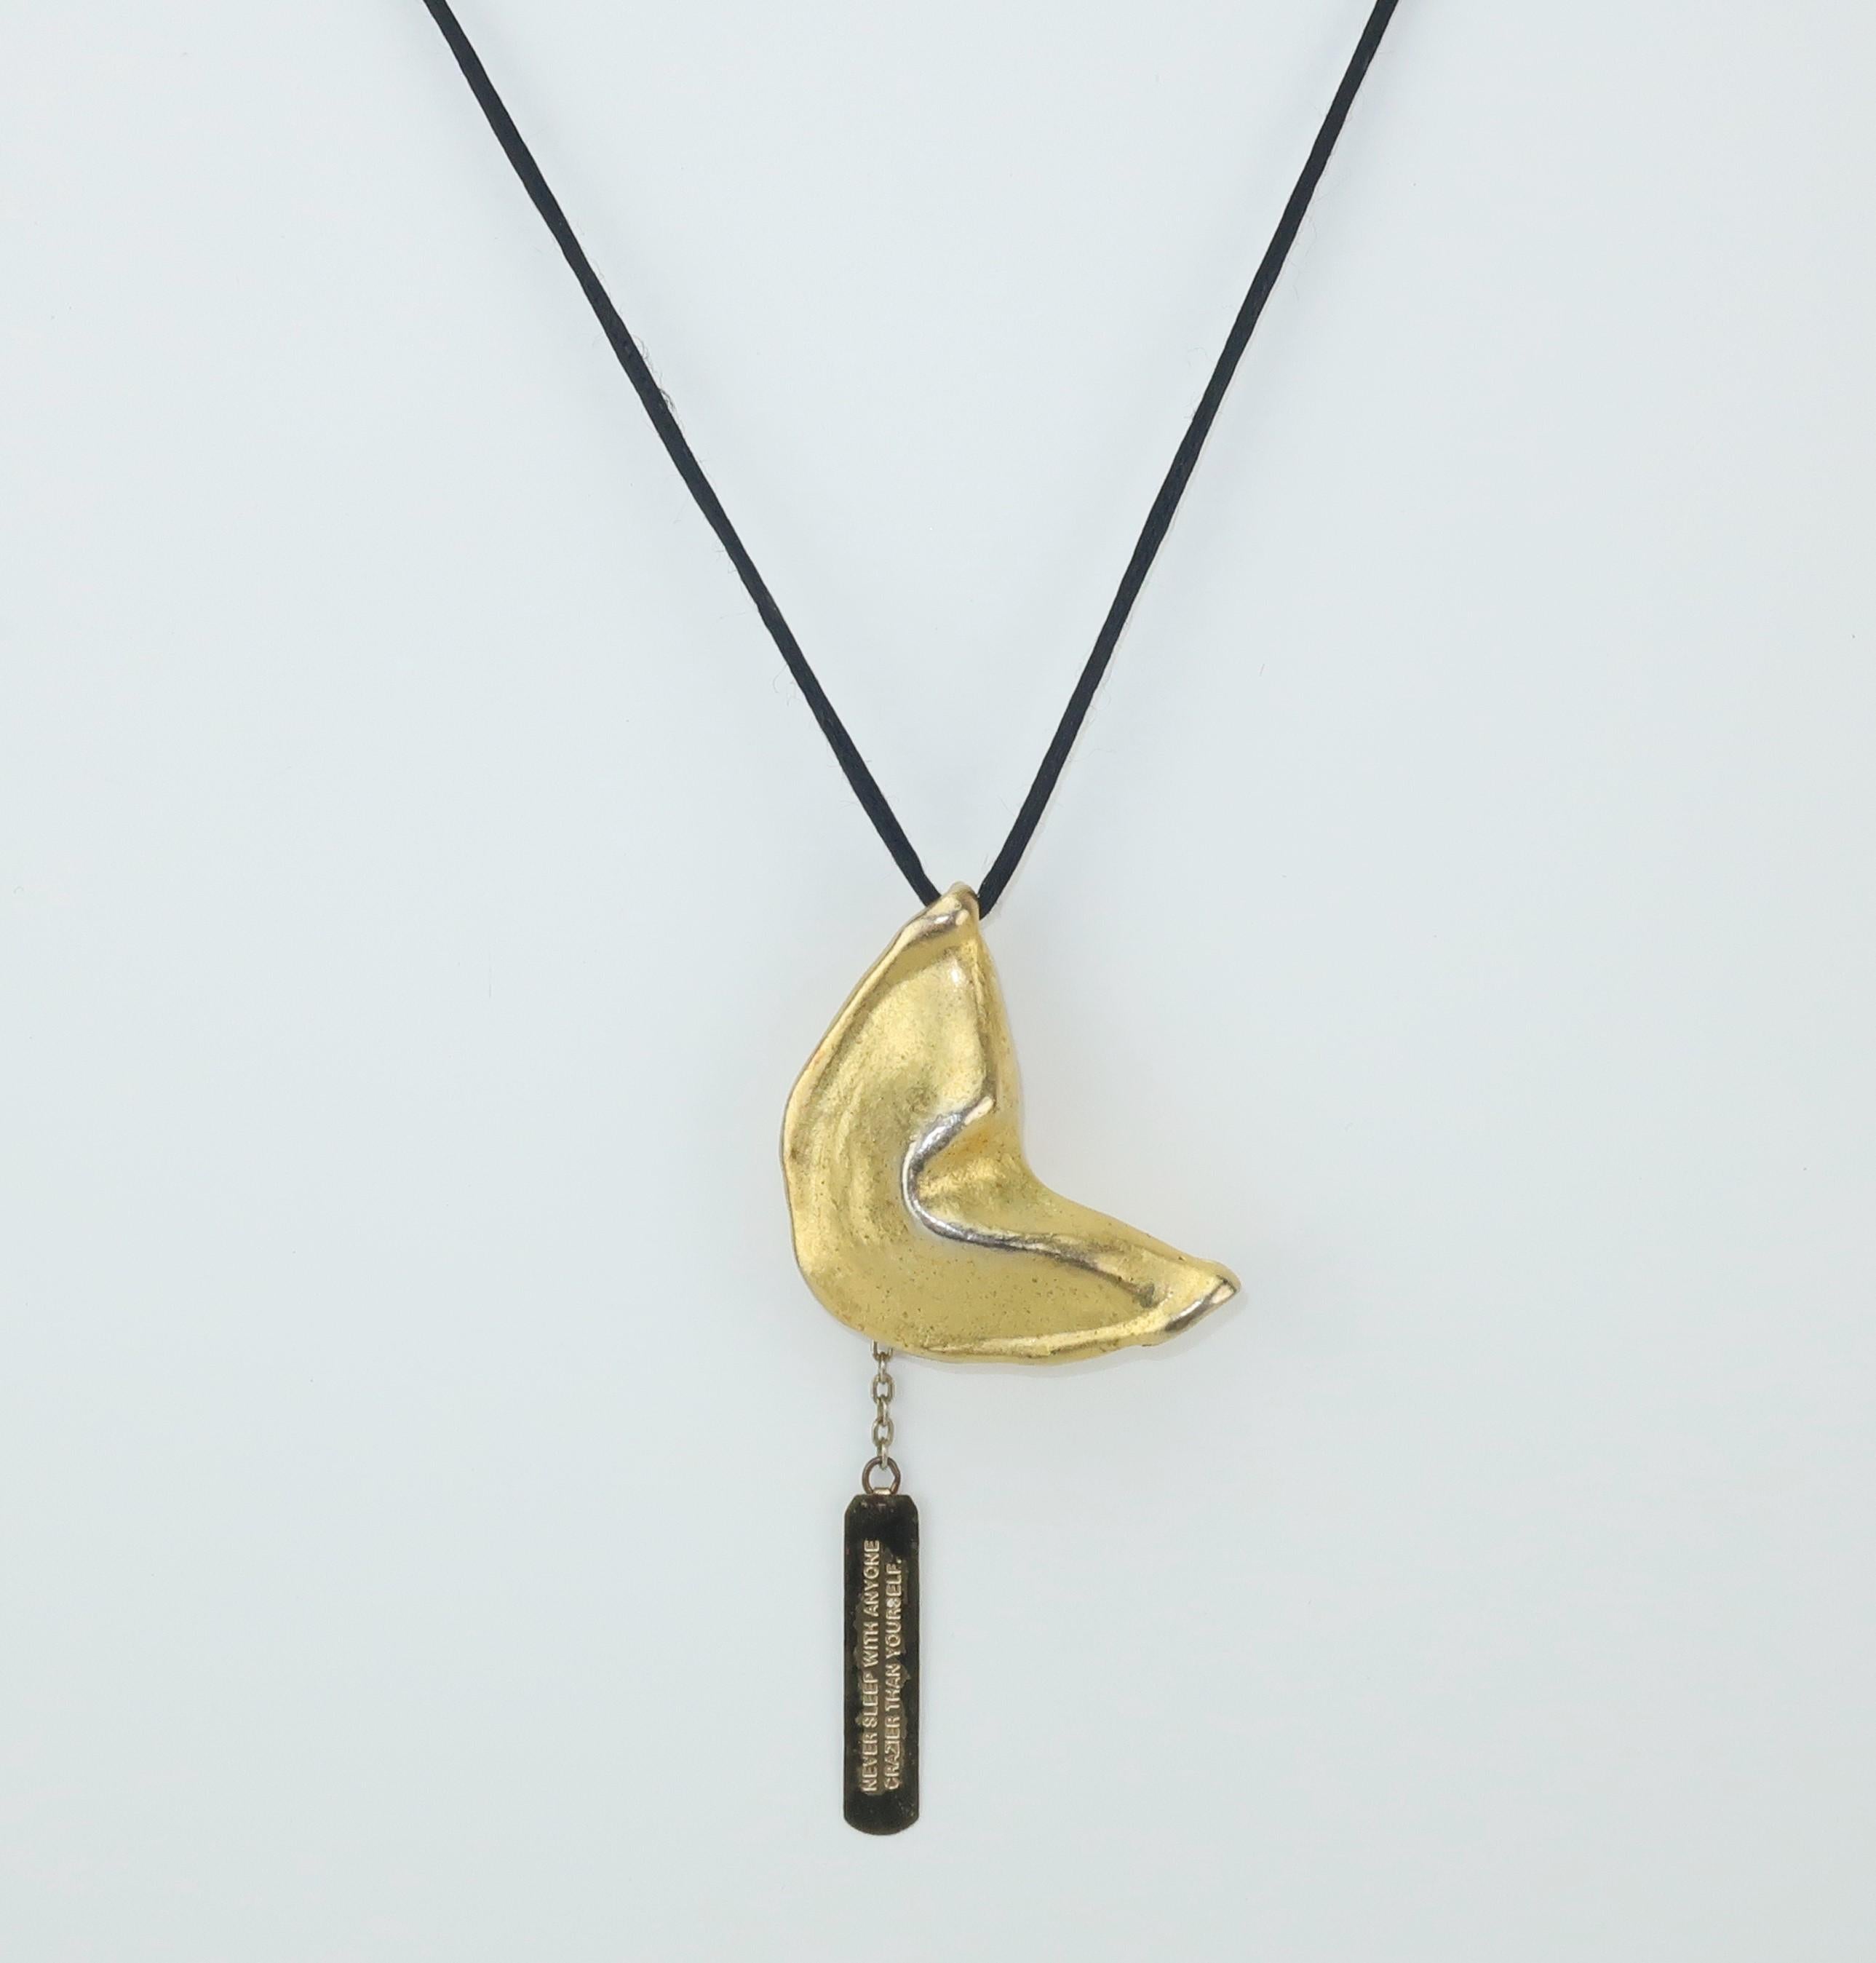 This witty fortune cookie necklace is a more contemporary design by the famous company founded by Miriam Haskell in the early 20th century.  The matte gold tone cookie is suspended by a black silk cord and is accompanied by a fortune which